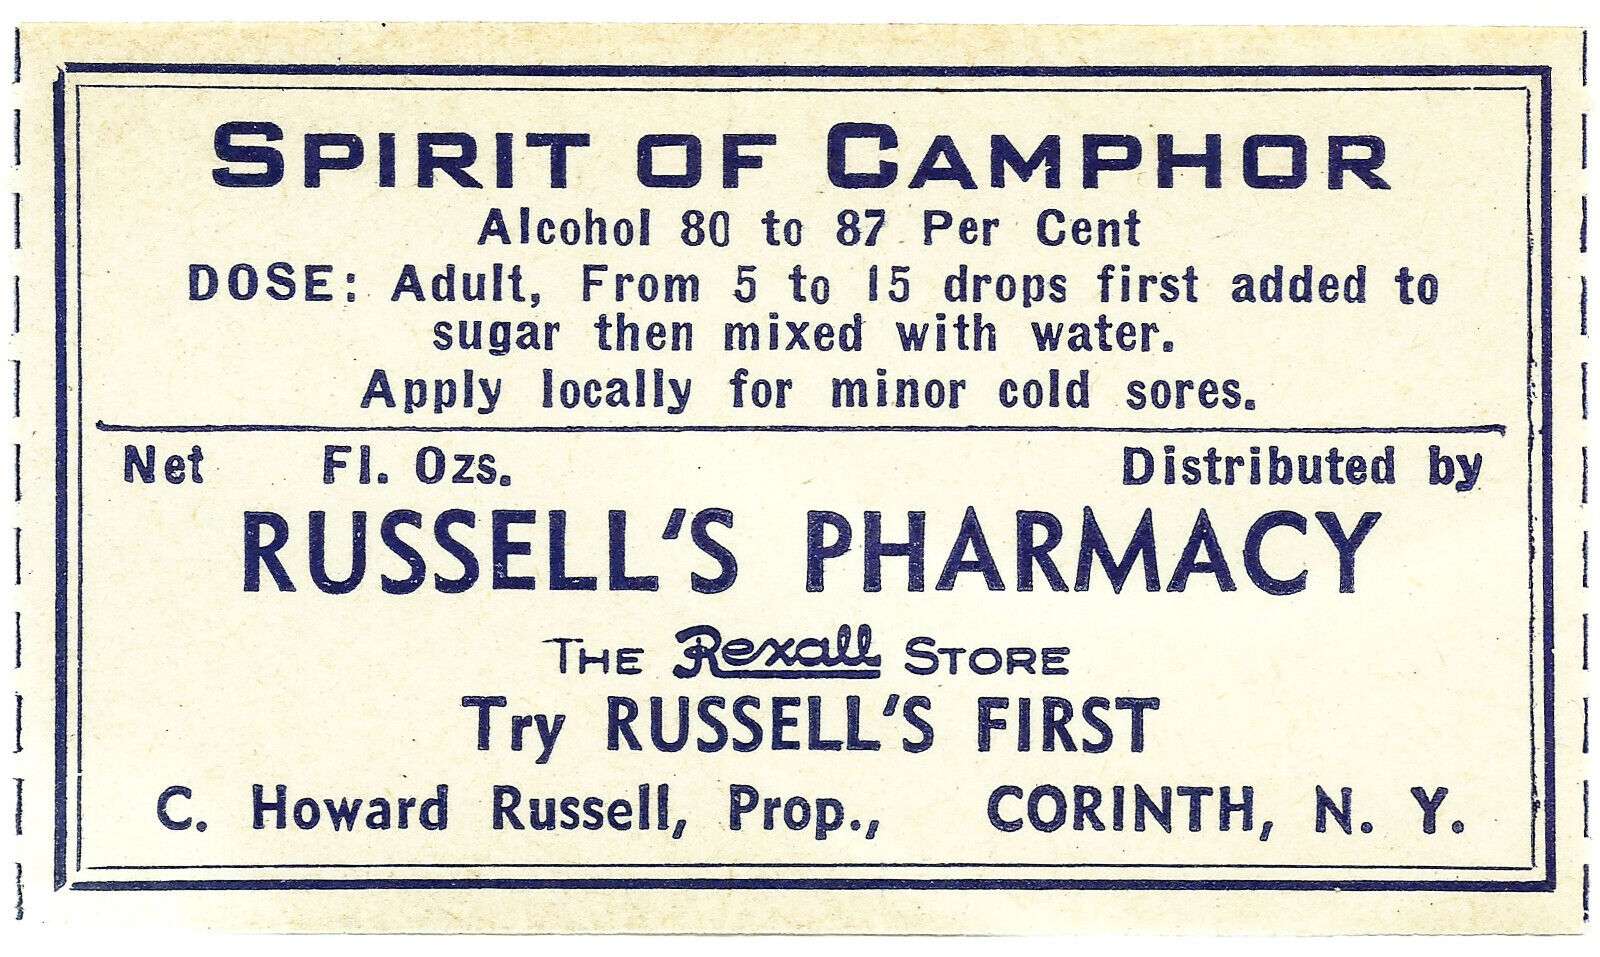 1 Vintage Gummed Label SPIRIT OF CAMPHOR Russell's Rexall Pharmacy Cornith N.Y.